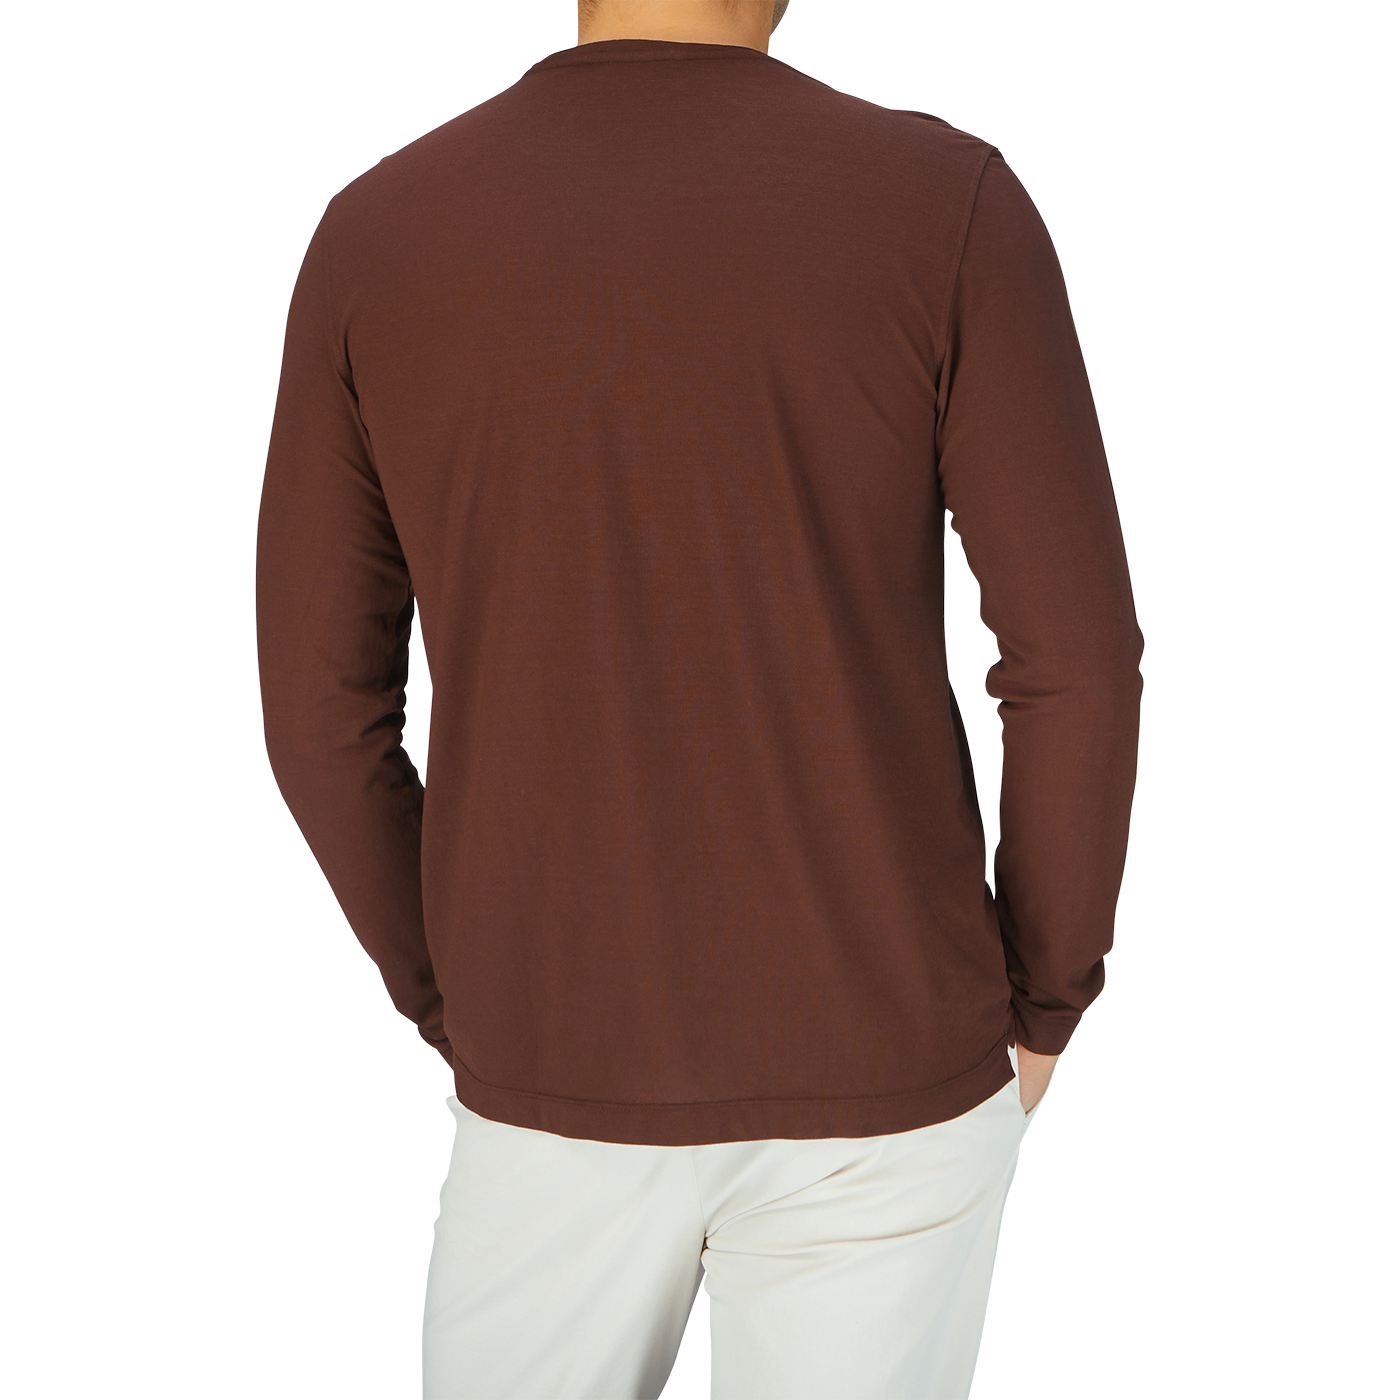 The man is wearing a long-sleeve shirt from Drumohr, specifically the Golden Brown Ice Cotton LS T-Shirt.